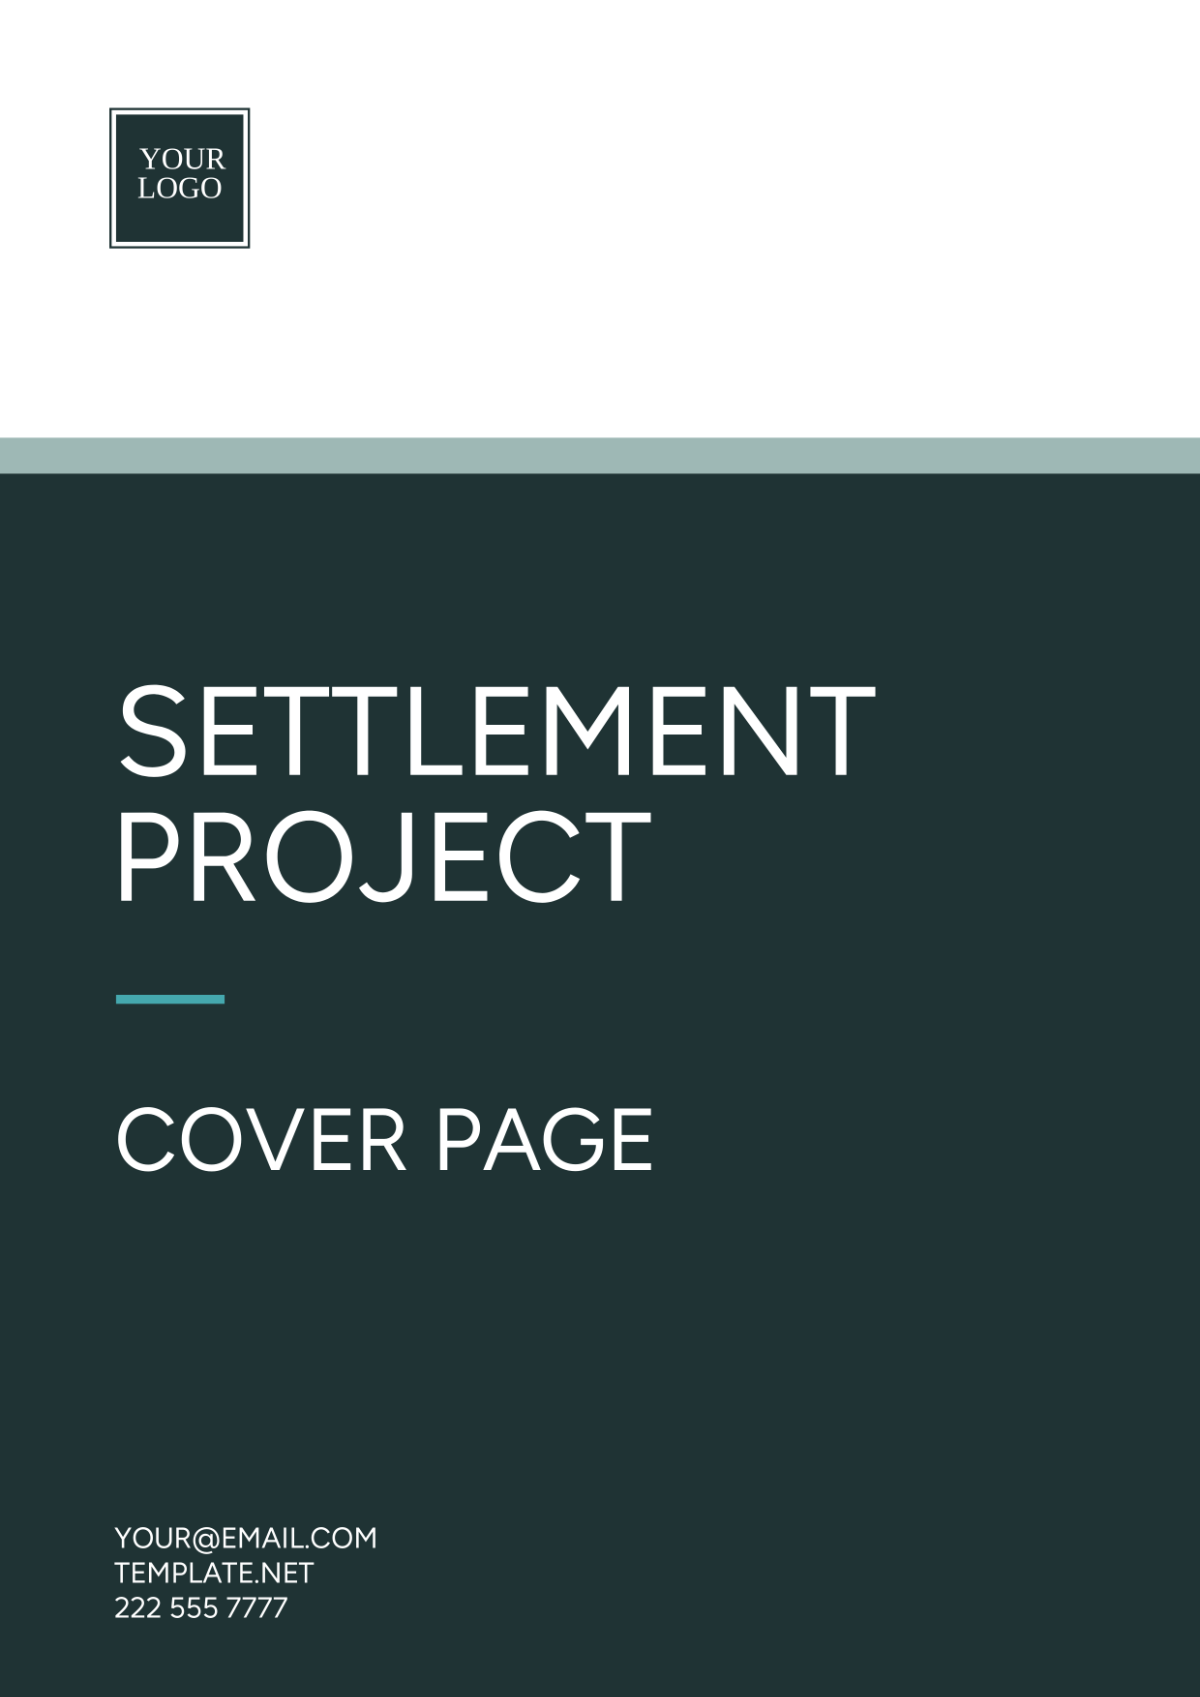 Free Settlement Project Cover Page Template